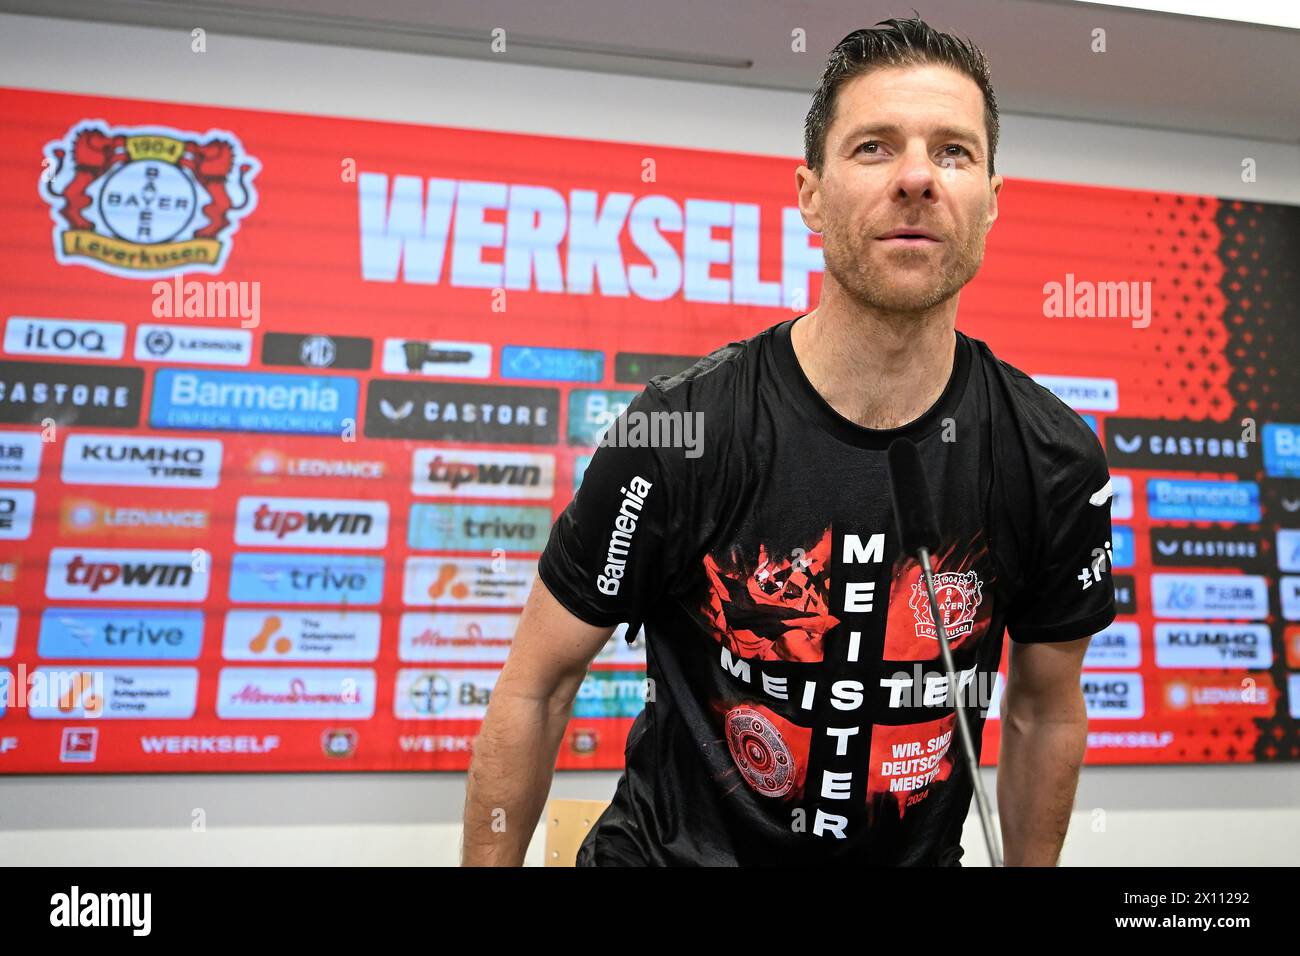 Leverkusen, Germany. 14th Apr, 2024. Xabi Alonso, head coach of Bayer 04 Leverkusen, attends a press conference after they won the first division of Bundesliga match between Bayer 04 Leverkusen and SV Werder Bremen in Leverkusen, Germany, April 14, 2024. Credit: Ulrich Hufnagel/Xinhua/Alamy Live News Stock Photo